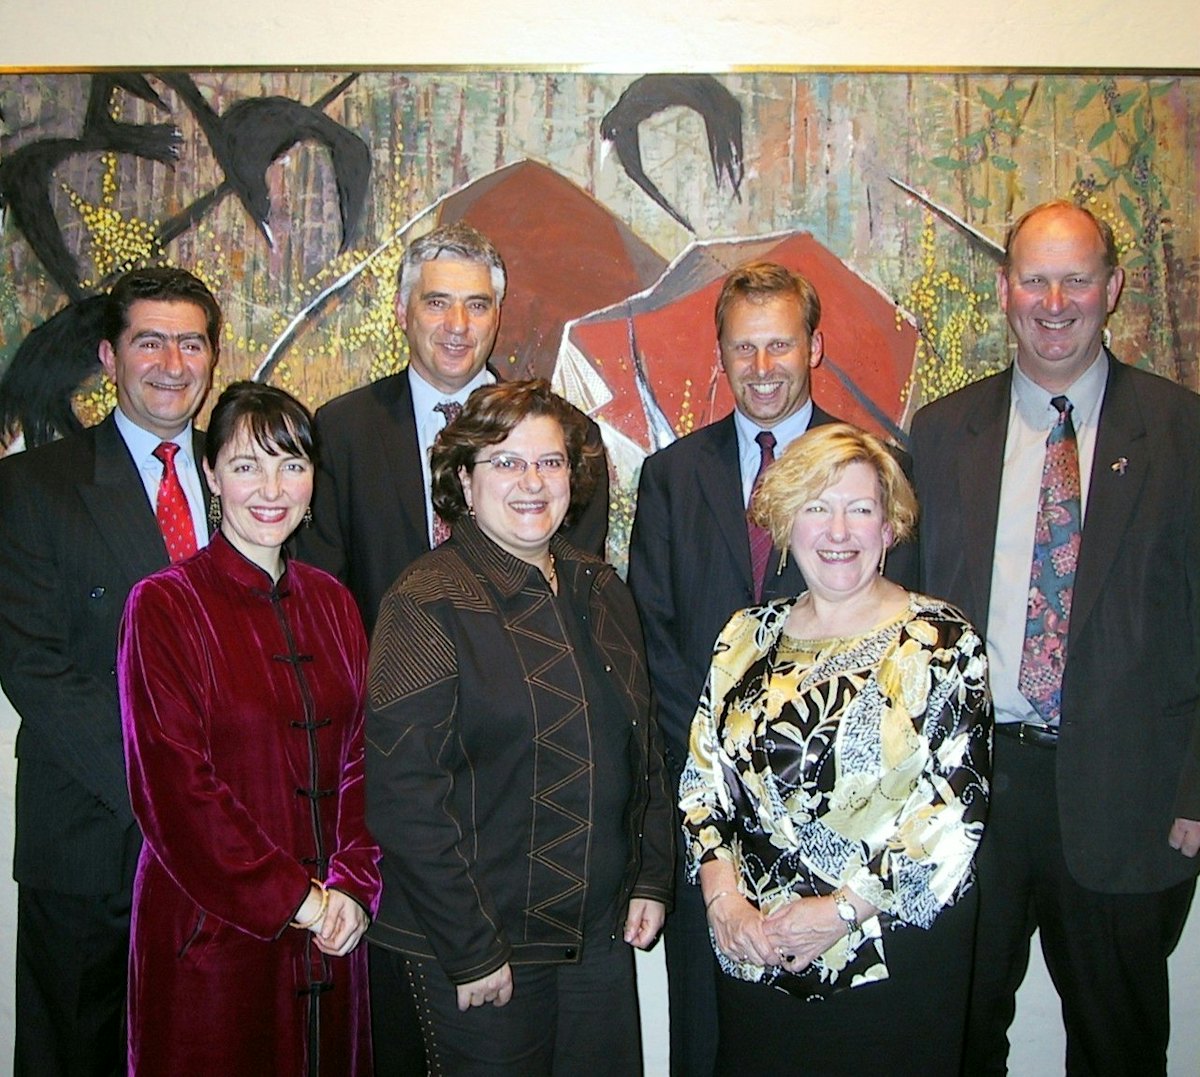 Australian national Baha'i education officer Kath Podger (front left), Victorian state parliamentary secretary for education Liz Beattie (front right), with participants at the appreciation event in Manningham.